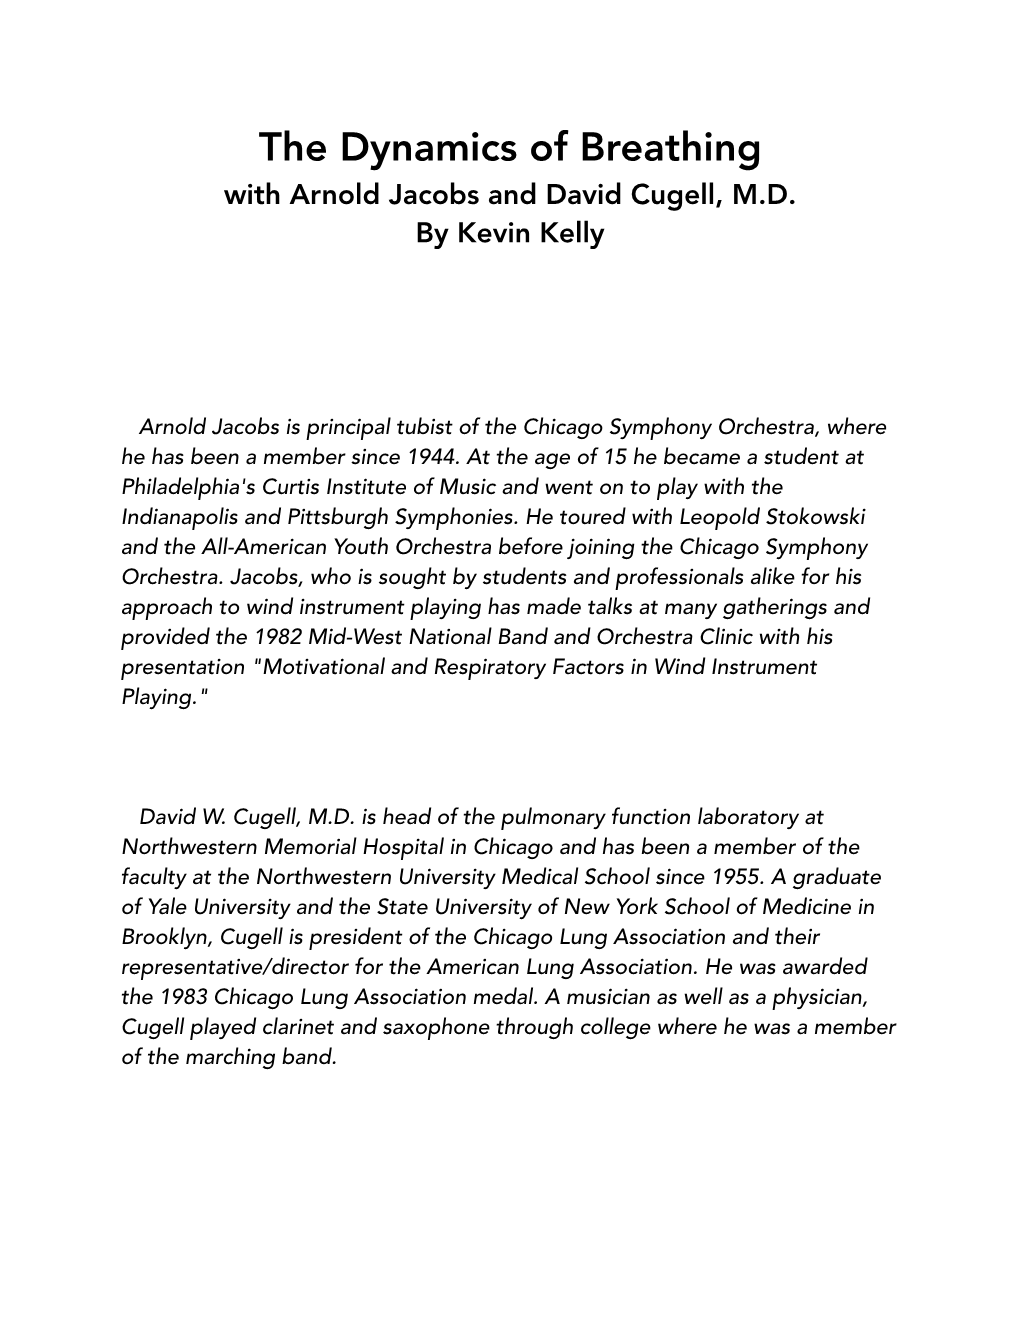 Dynamics of Breathing with Arnold Jacobs and David Cugell, M.D